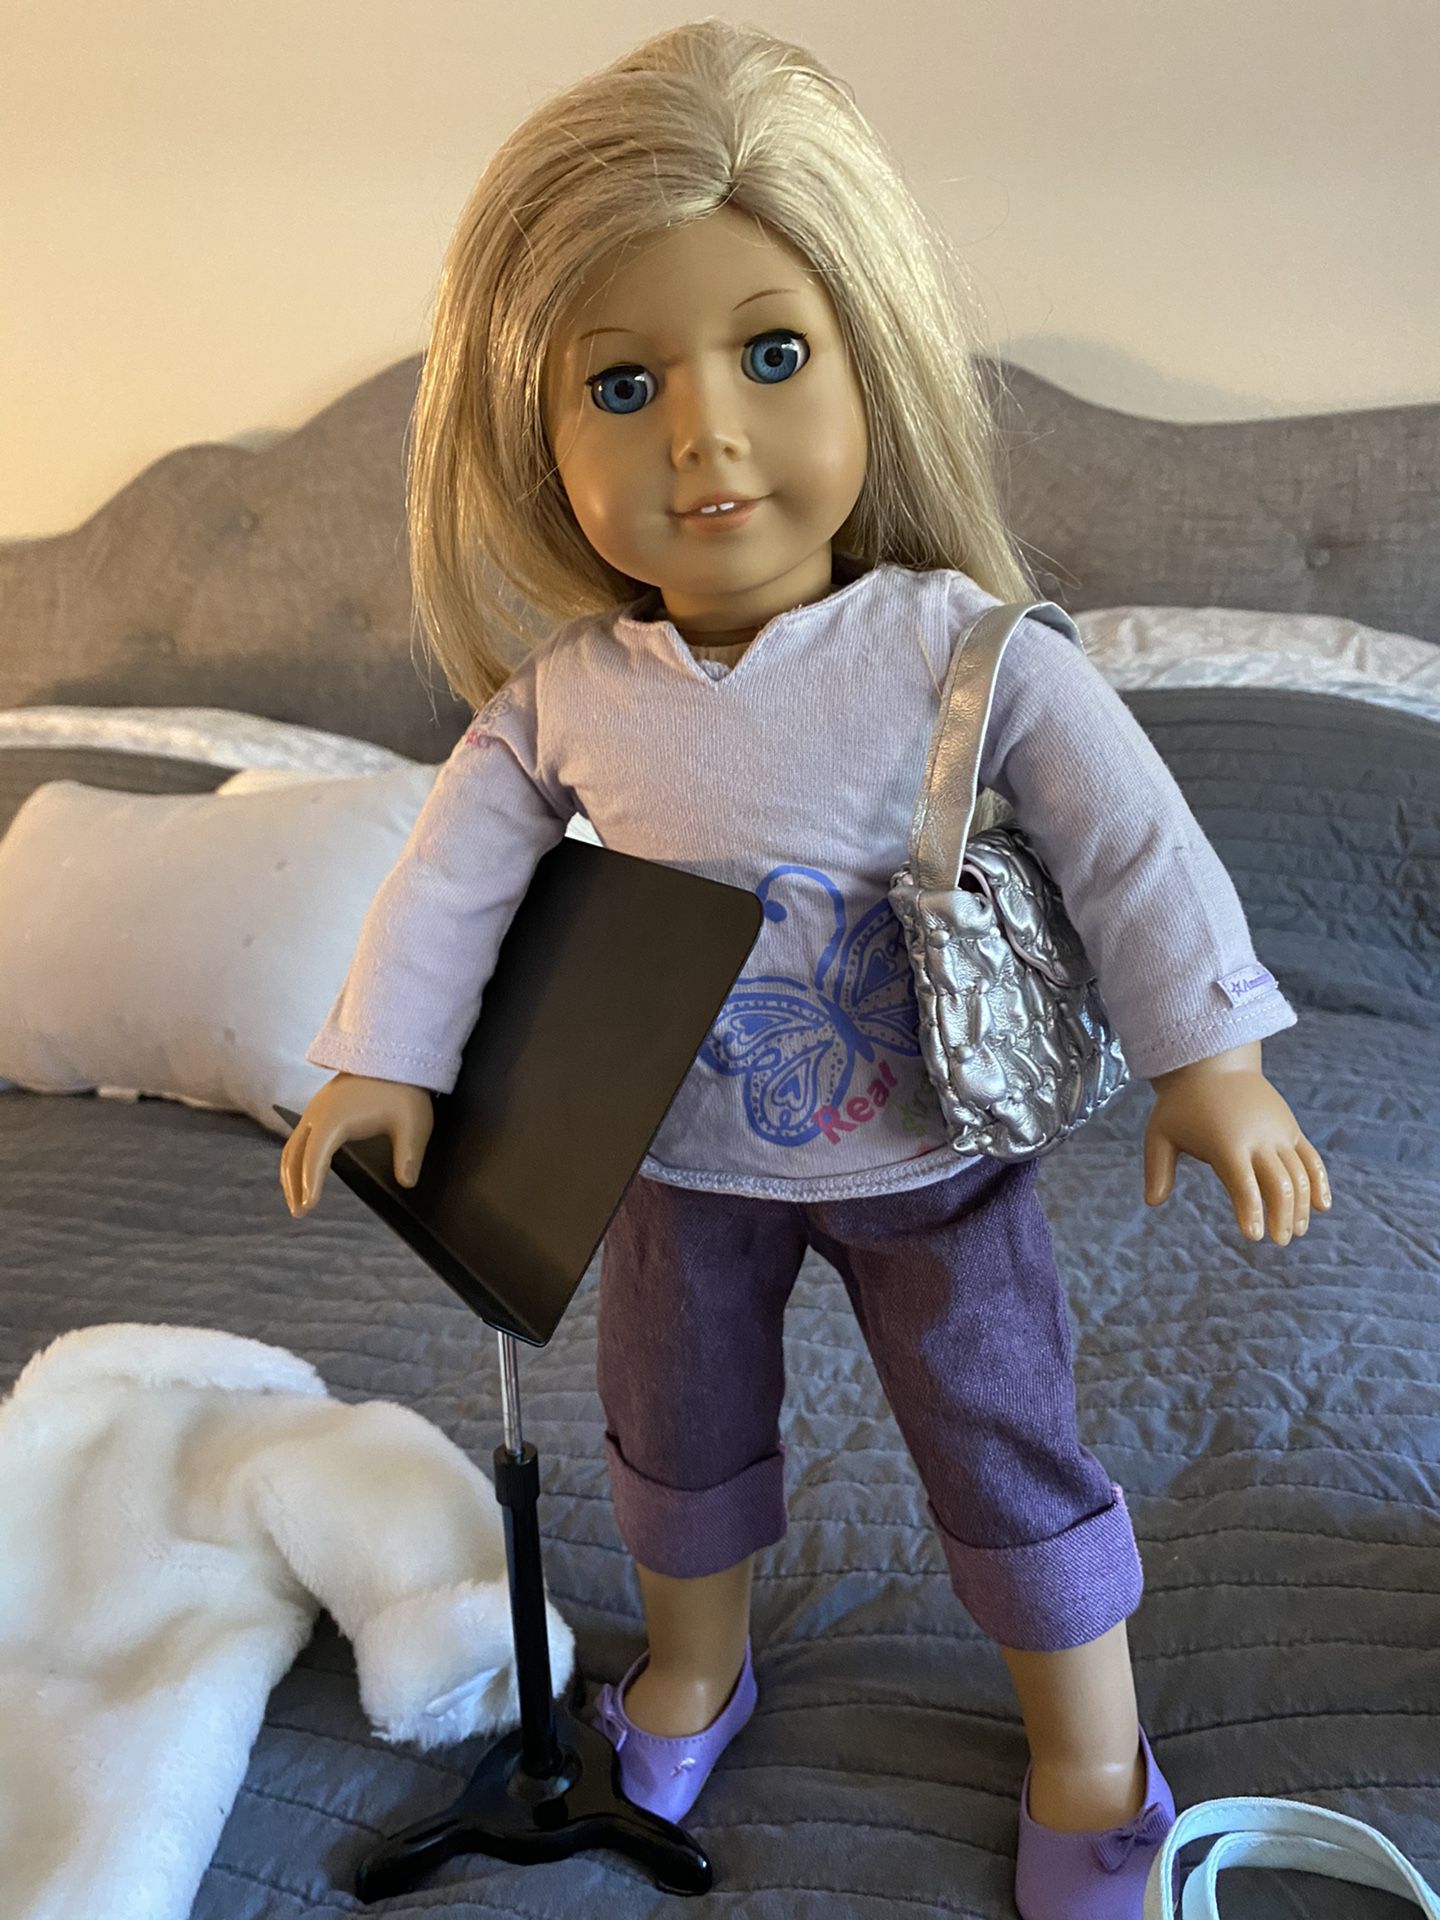 Blonde/Blue American Girl Doll clothing and accessories